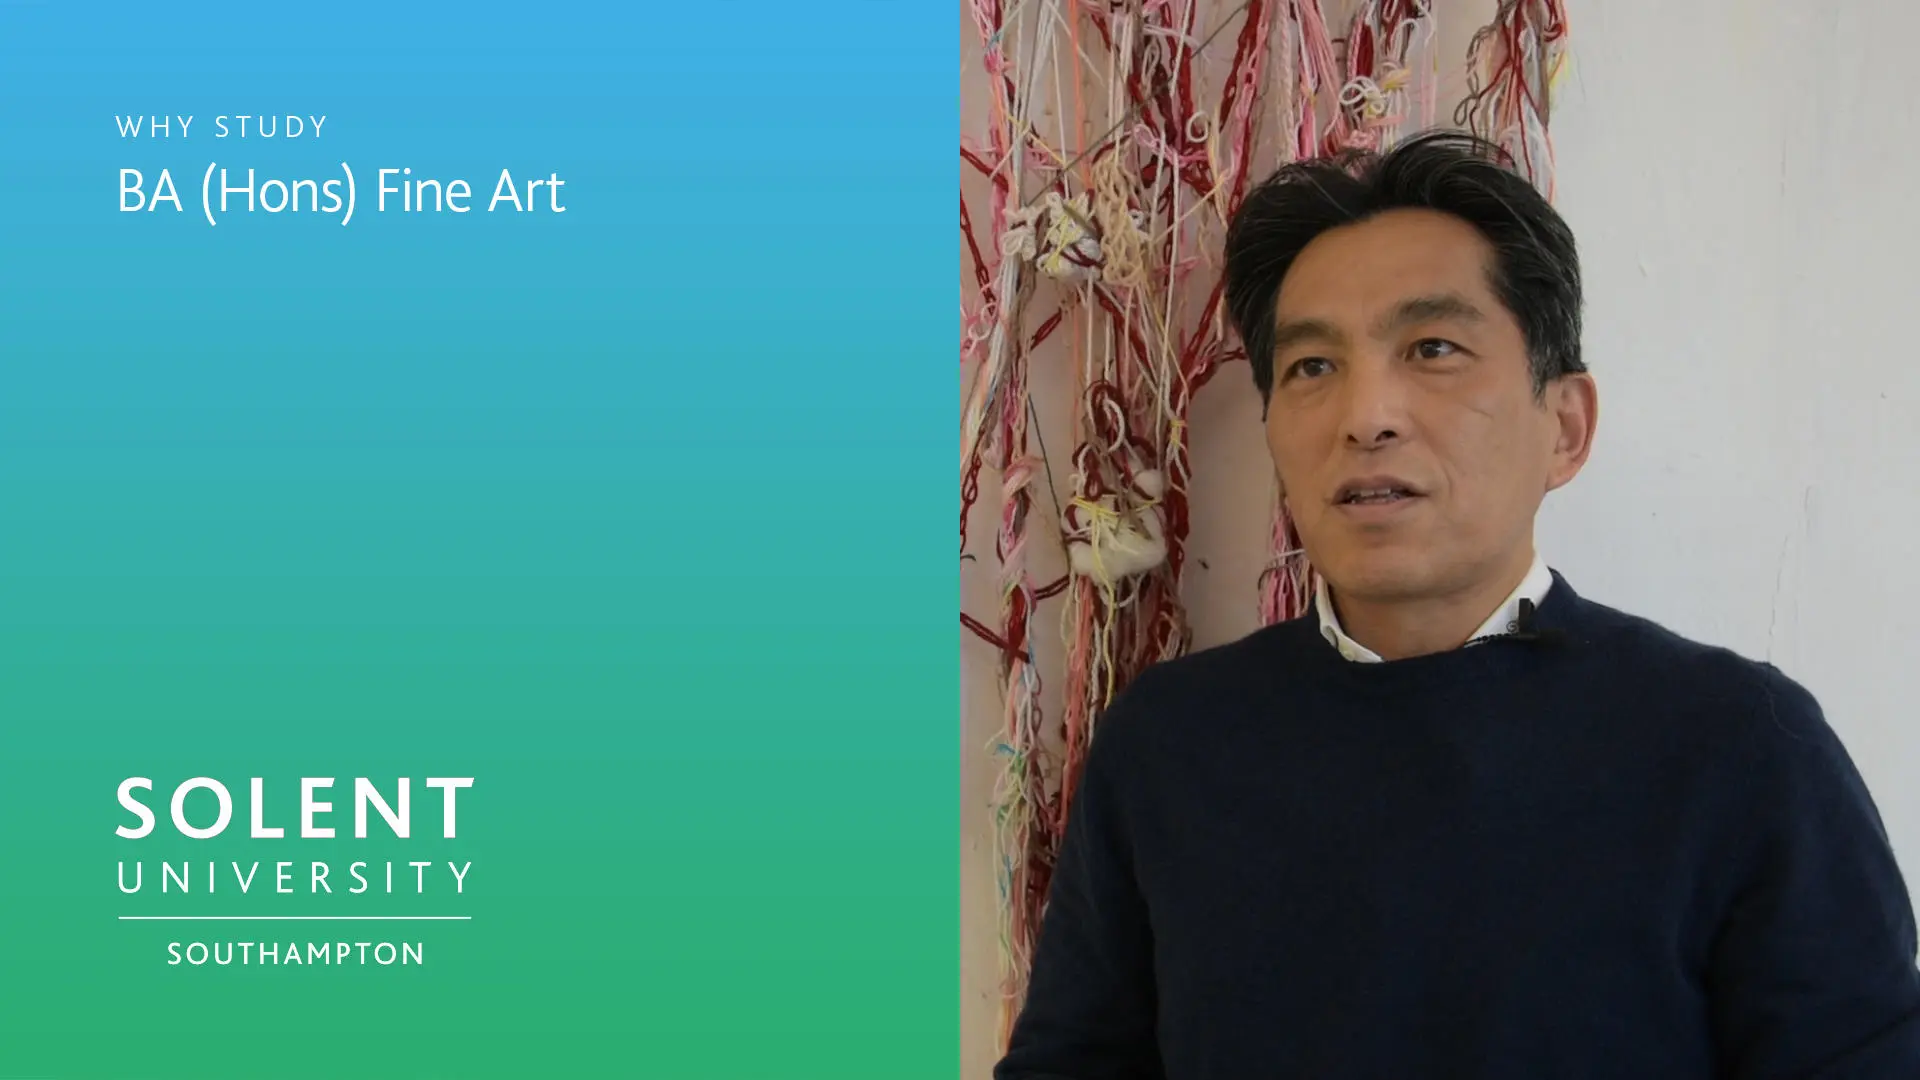 On the left of the screen is a blue to green gradient (portrait) with white copy over the top which reads 'Why study BA (Hons) Fine Art' and the Solent University, Southampton logo bottom left. To the right is a photo of Senior Research Fellow, Dr Atsuhide Ito.